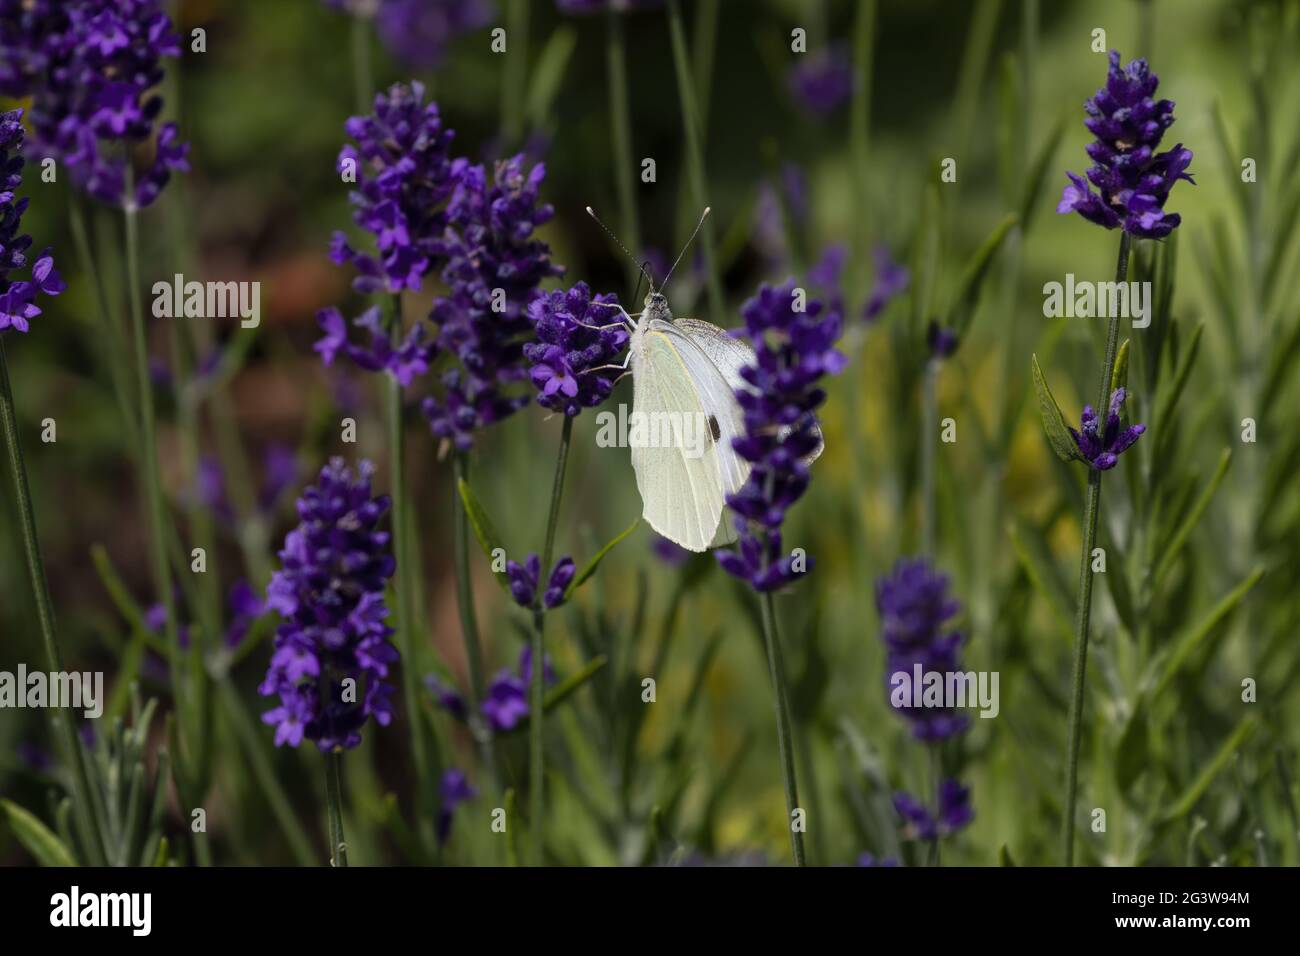 Cabbage white butterfly feasting on lavender flower Stock Photo